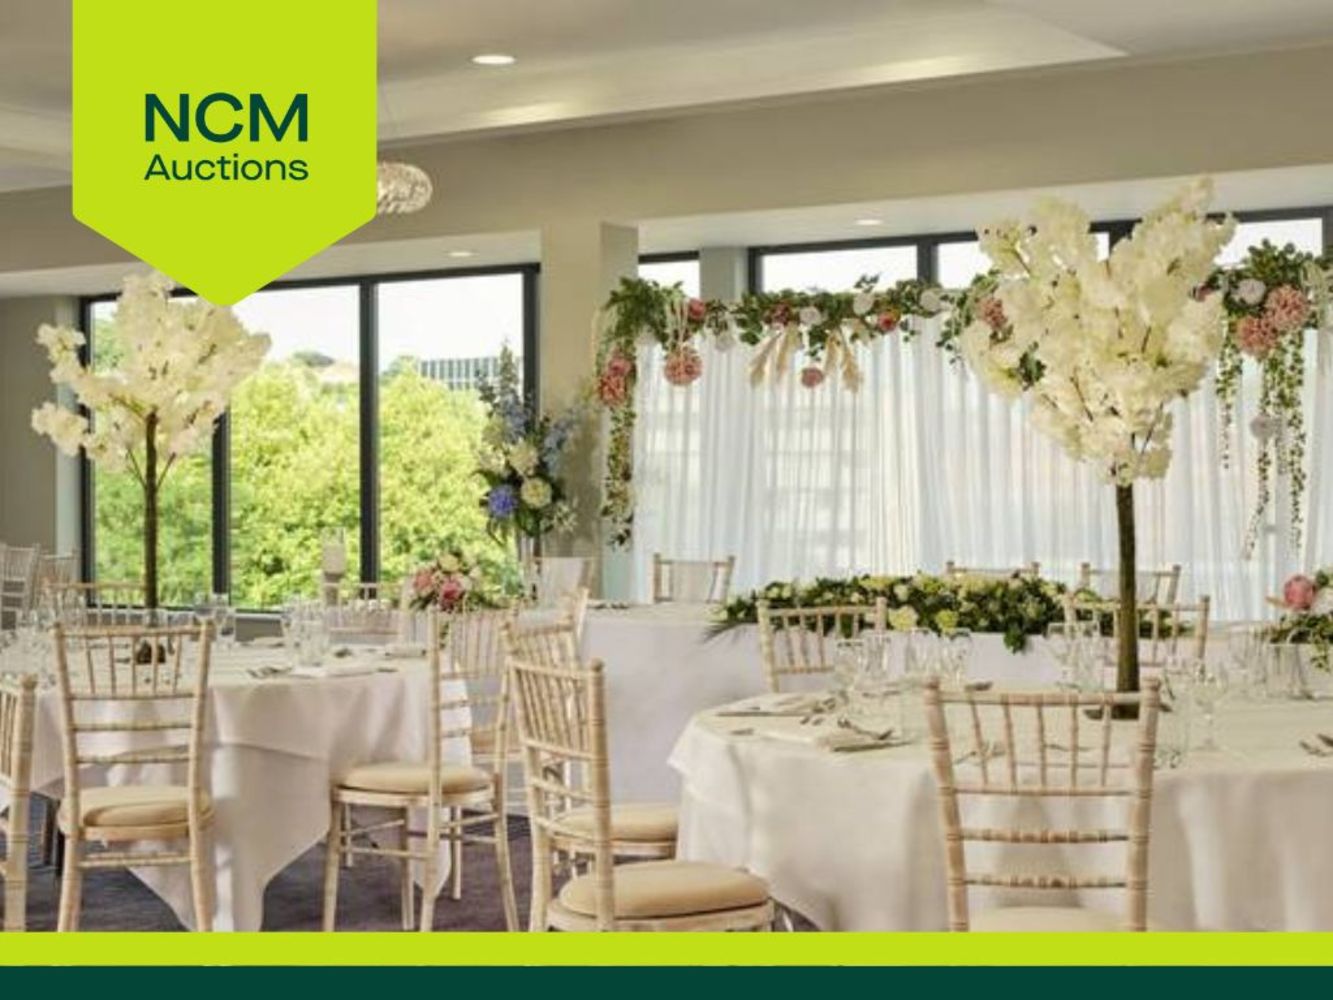 NO RESERVE - Entire Contents Of Wedding Venue To Include Commercial Catering Equipment, Challen Grand Piano, Wedding Accessories & Much More